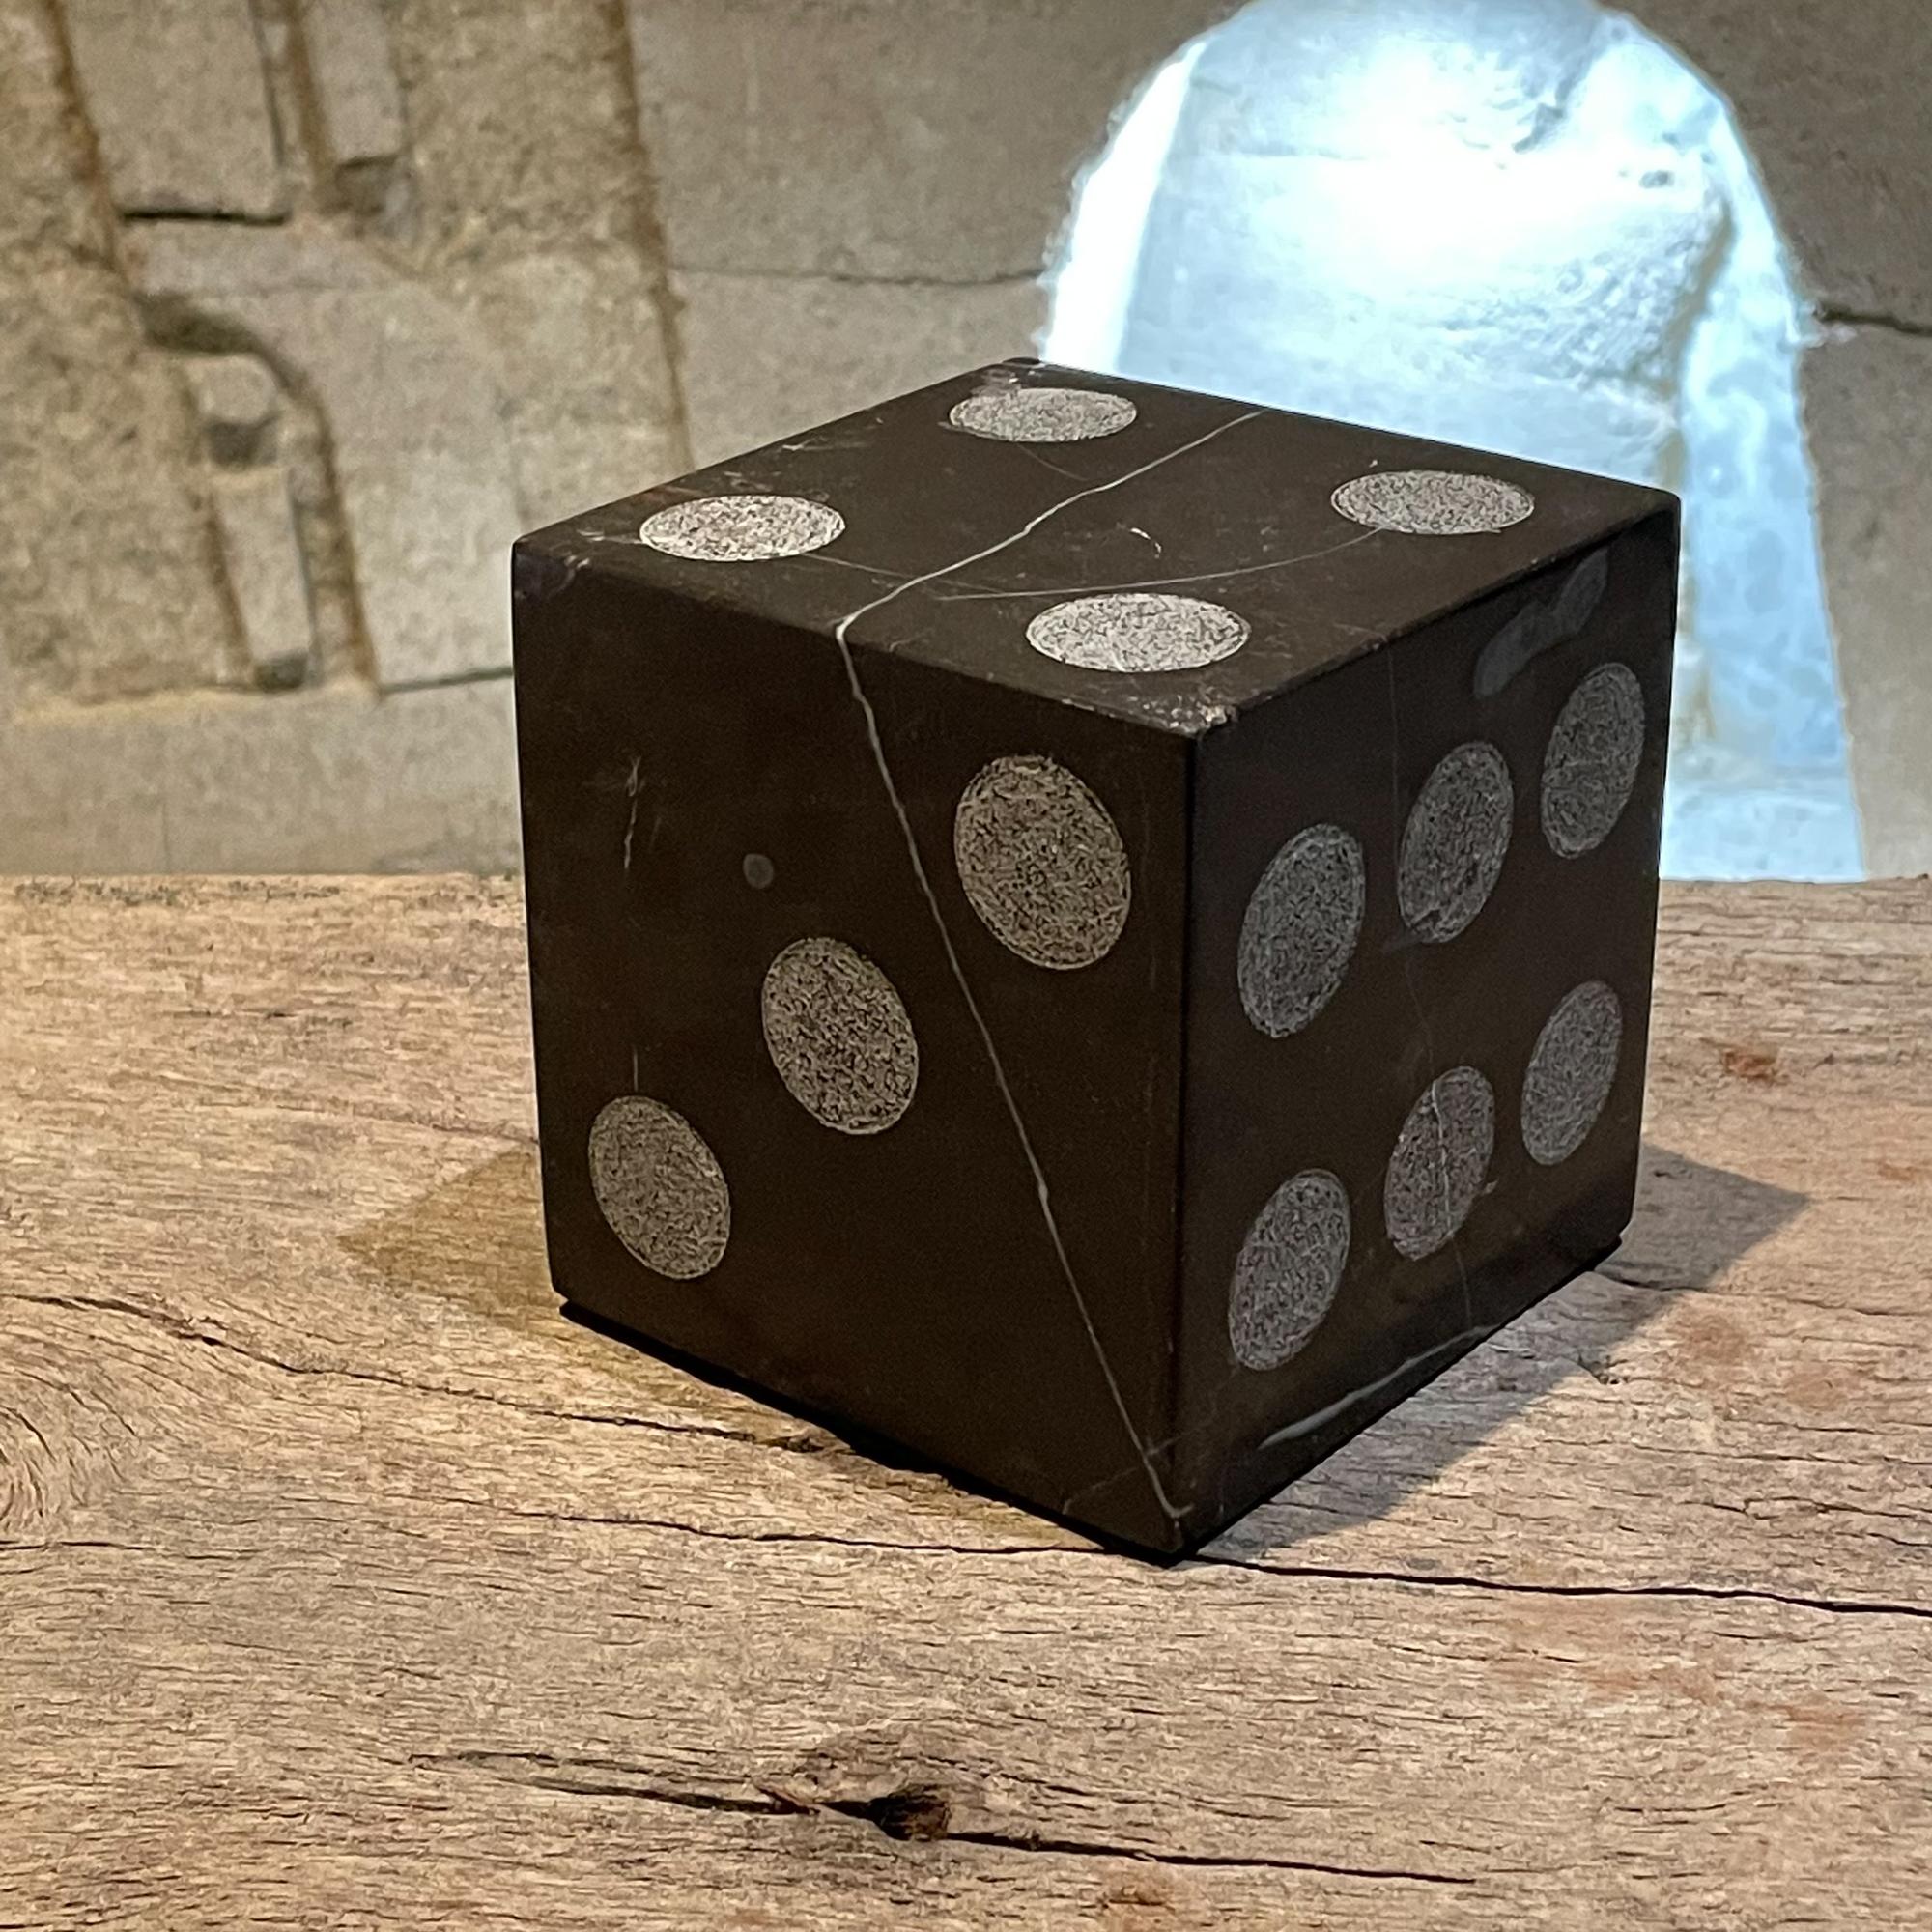 Artisan black marble stone dice handmade table sculpture modern vintage
Unmarked. One piece.
Measures: 4 x 4 inches
Unrestored preowned vintage presentation.
Refer to our images.
Ready to go. Roll the dice.